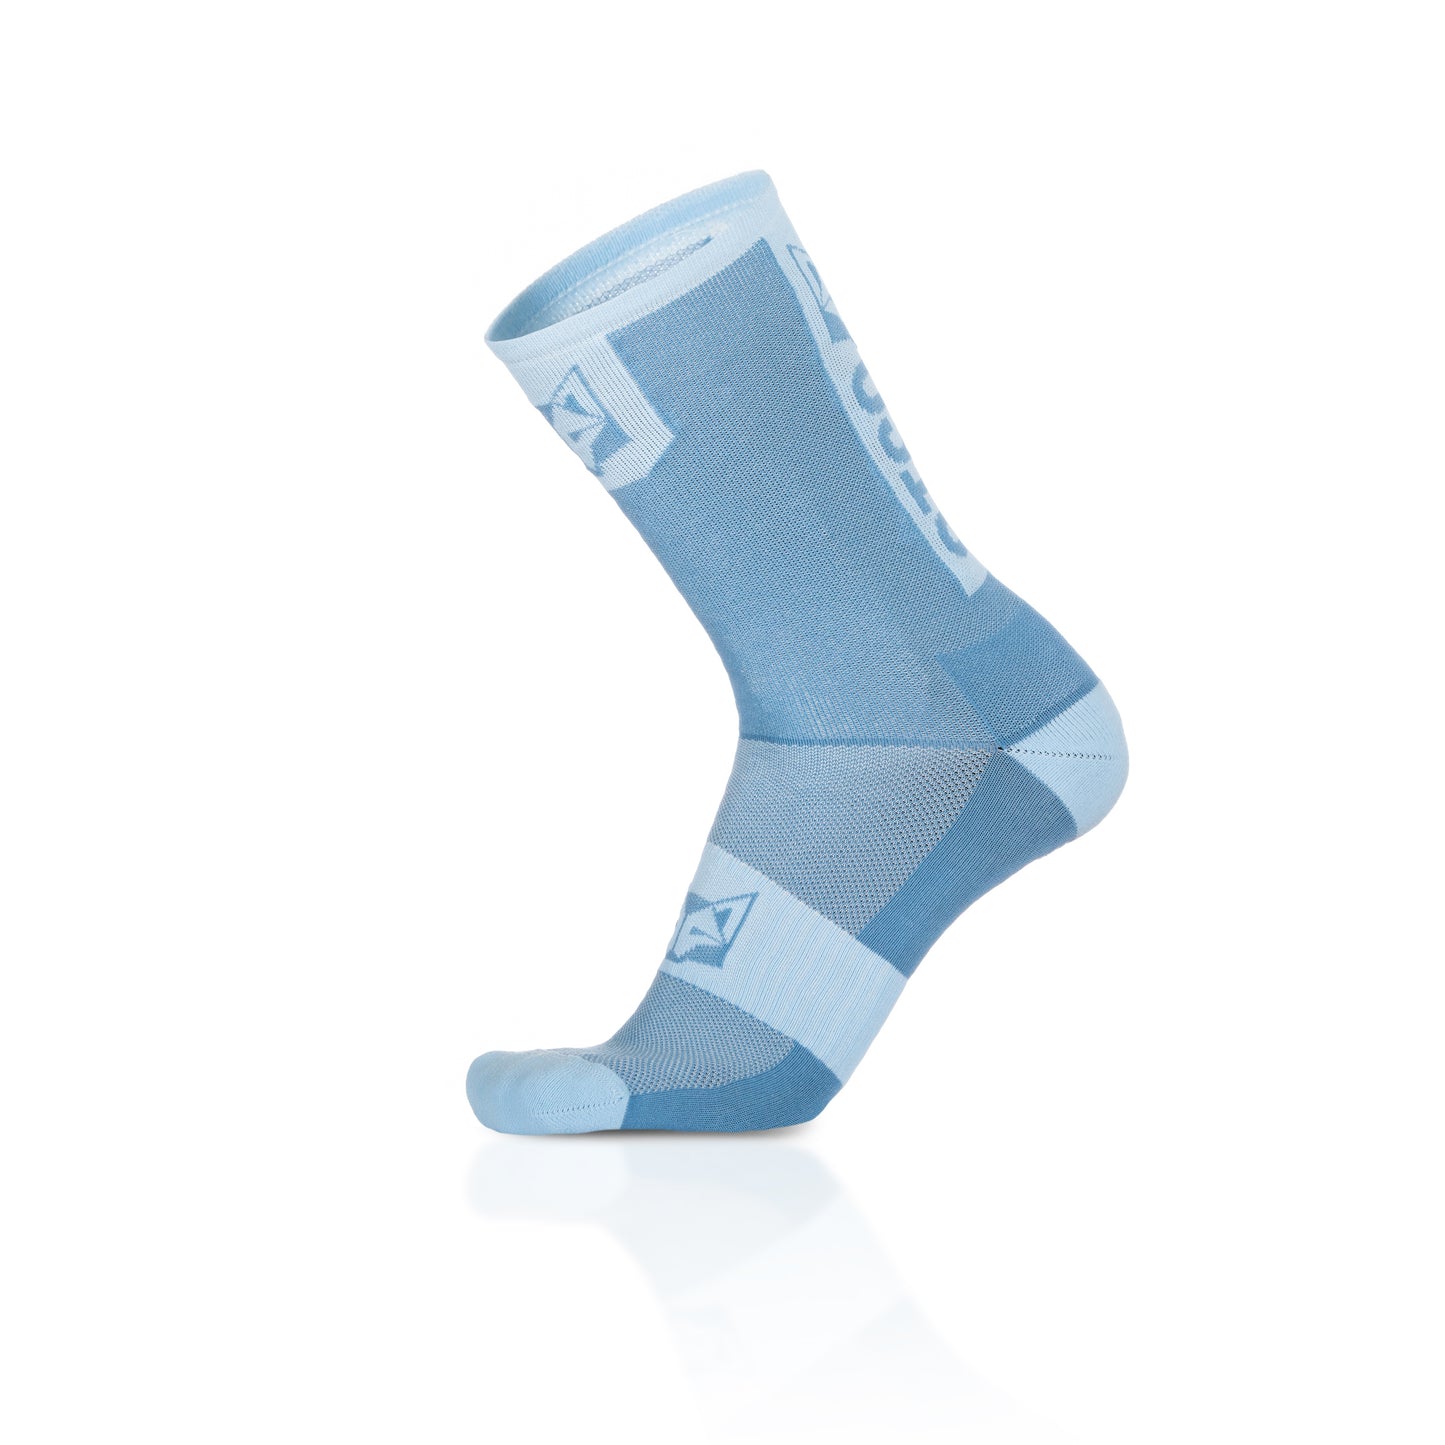 Calcetines de Ciclismo High Cut - Steel Blue & Turquoise (Outlet)